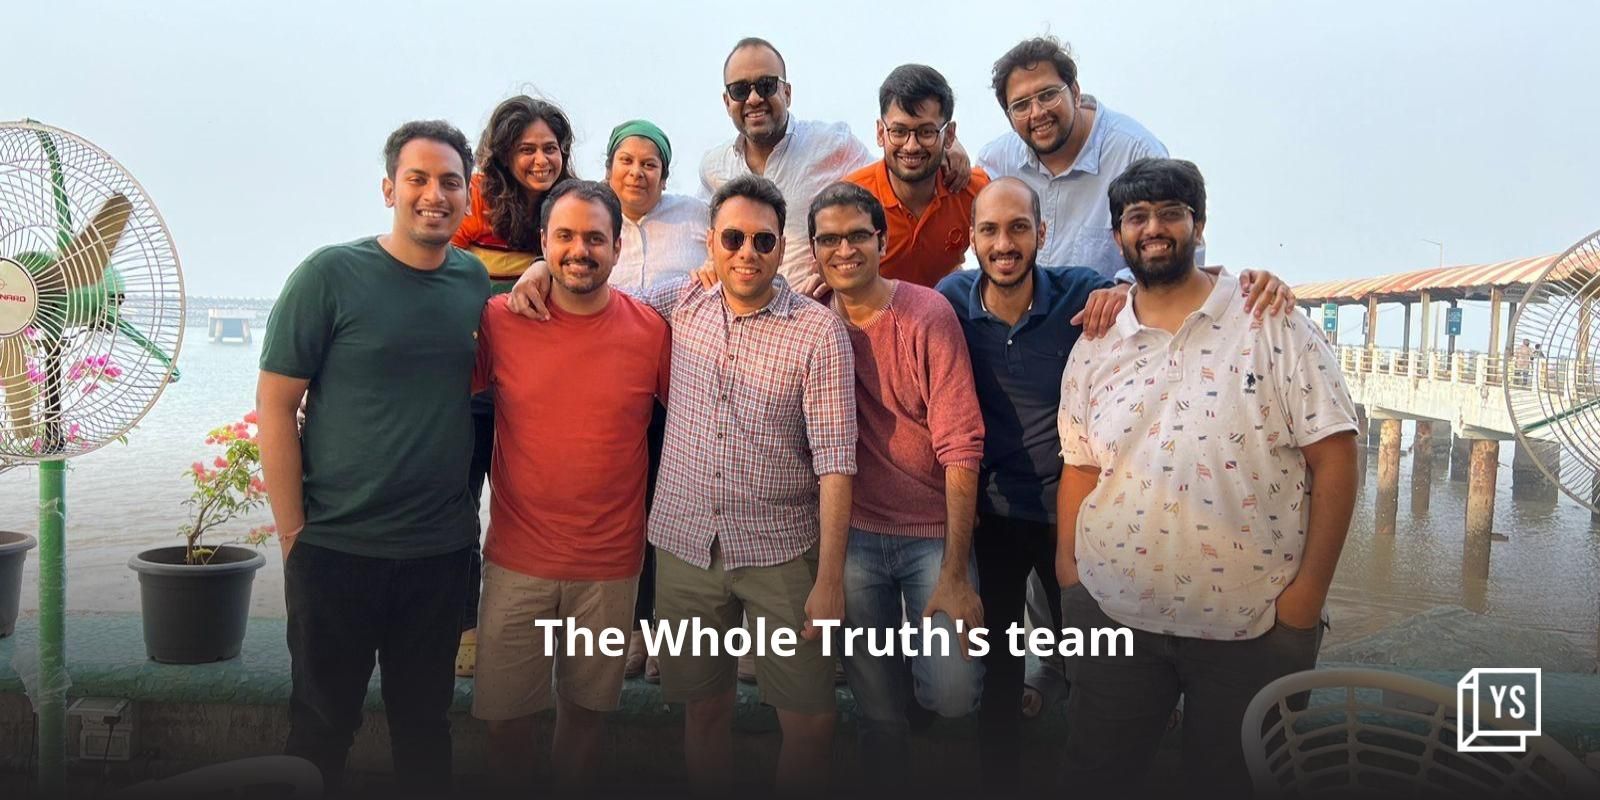 The Whole Truth raises $15M in Series B funding round led by Sequoia Capital